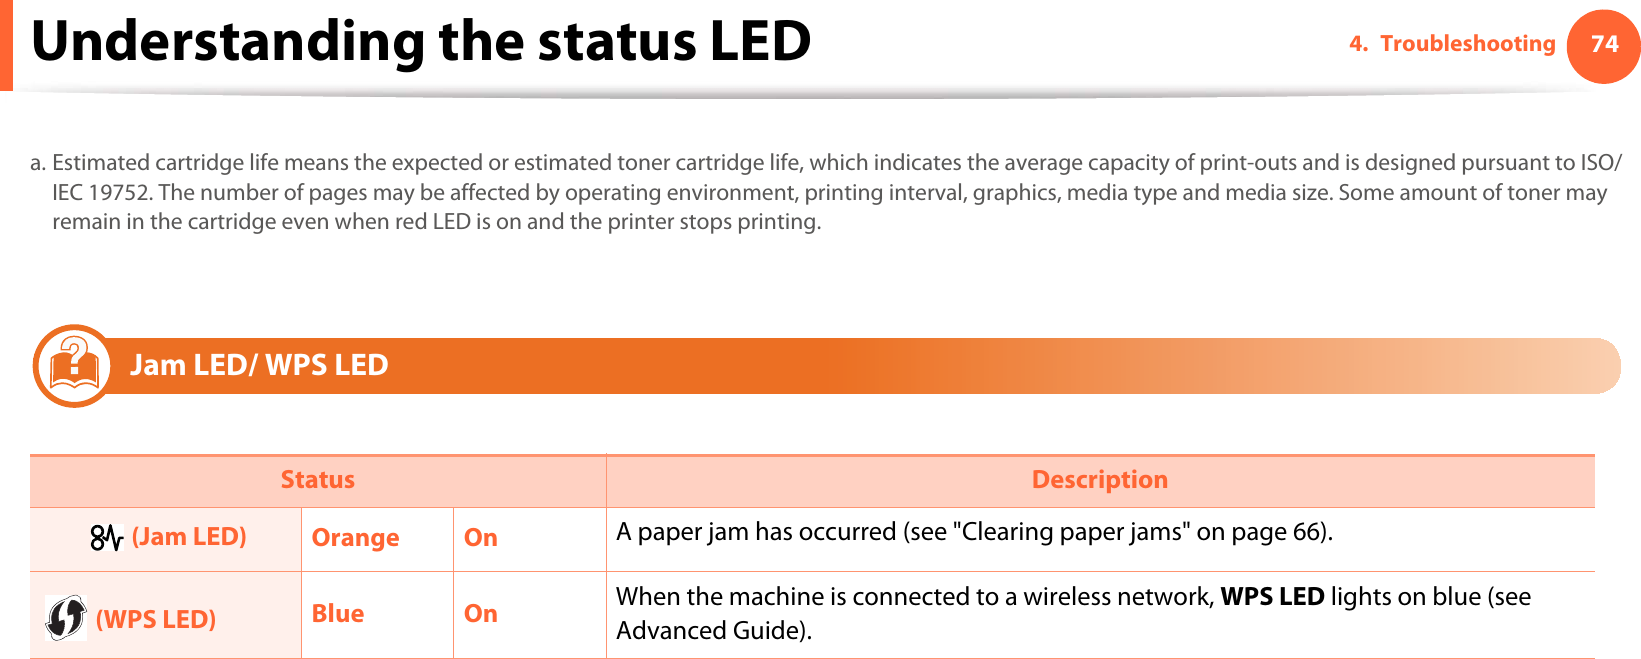 Understanding the status LED 744. Troubleshooting 8Jam LED/ WPS LED  a. Estimated cartridge life means the expected or estimated toner cartridge life, which indicates the average capacity of print-outs and is designed pursuant to ISO/IEC 19752. The number of pages may be affected by operating environment, printing interval, graphics, media type and media size. Some amount of toner may remain in the cartridge even when red LED is on and the printer stops printing.Status Description (Jam LED) Orange On A paper jam has occurred (see &quot;Clearing paper jams&quot; on page 66). (WPS LED) Blue On When the machine is connected to a wireless network, WPS LED lights on blue (see Advanced Guide).